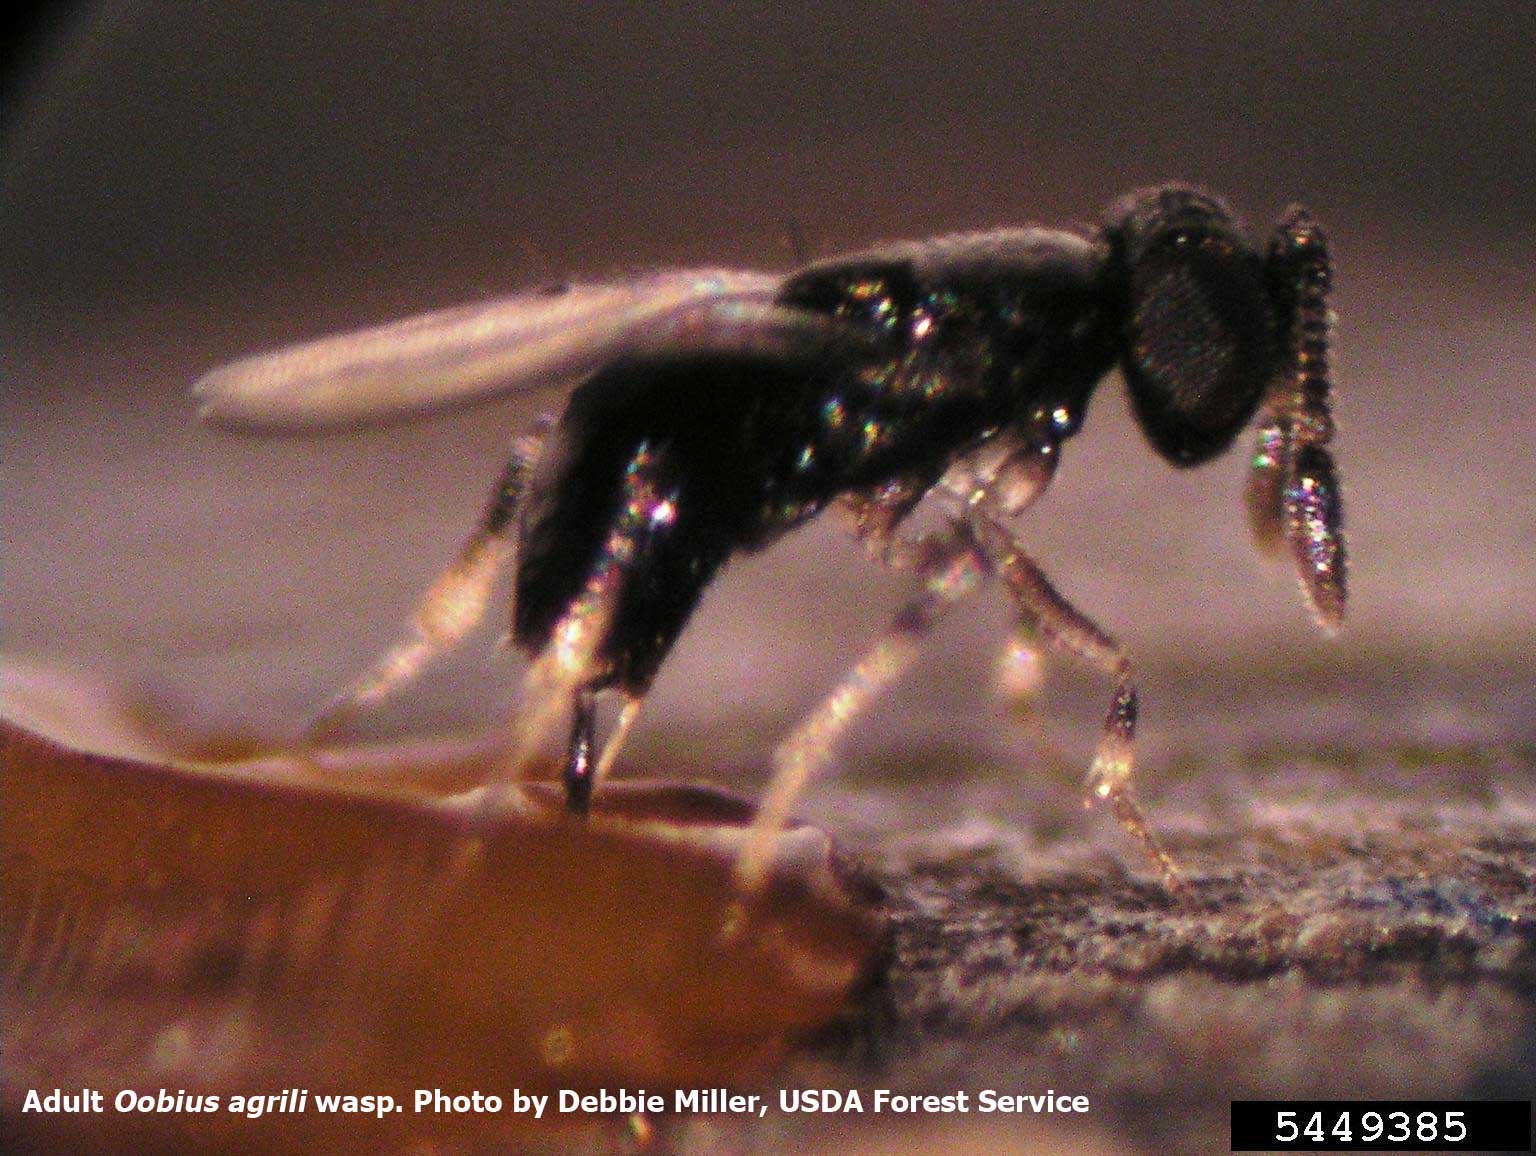 Adult Oobius agrili wasp - photo by Debbie Miller, USDA Forest Service